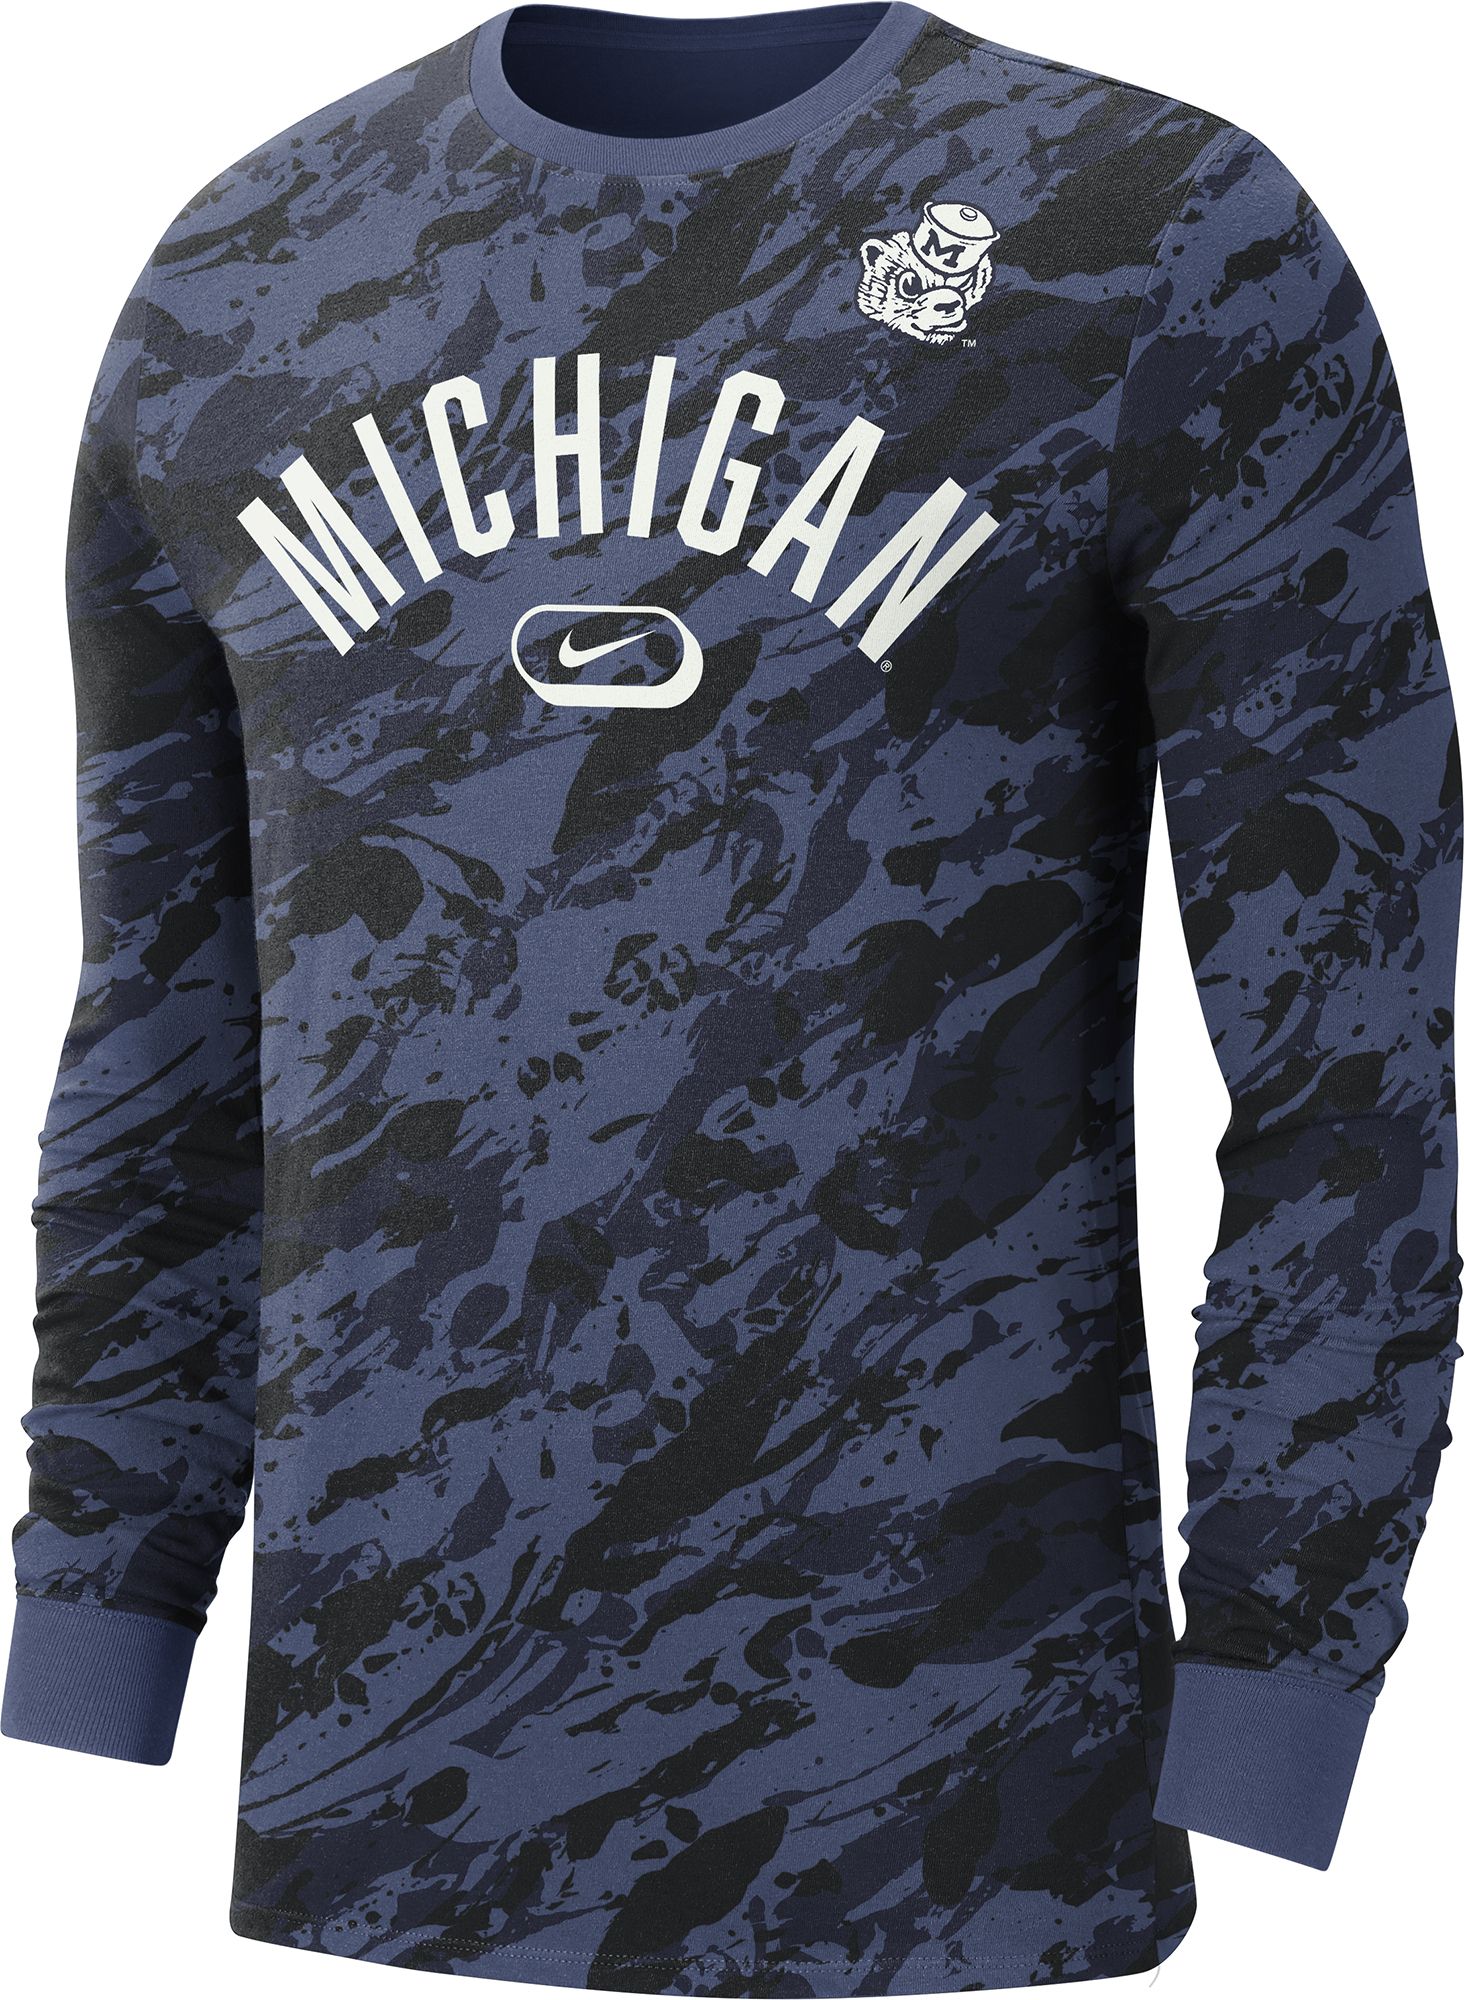 Nike Men's Michigan Wolverines Navy All Over Print Long Sleeve T-Shirt